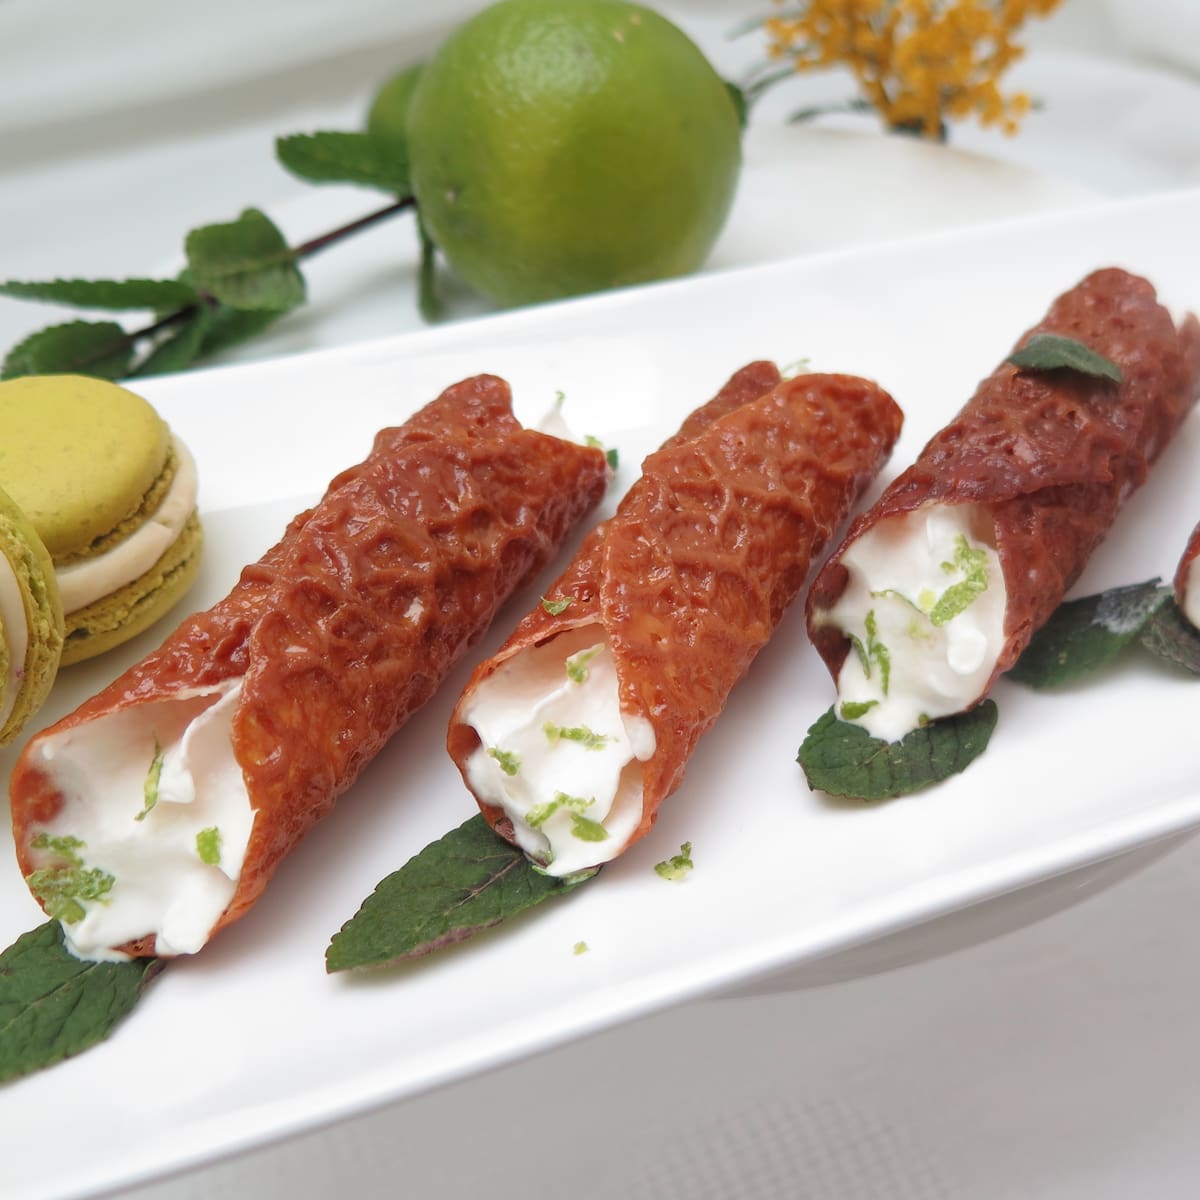 brandy snap tubes filled with lightly whipped cream and garnished with mint leaves and lime